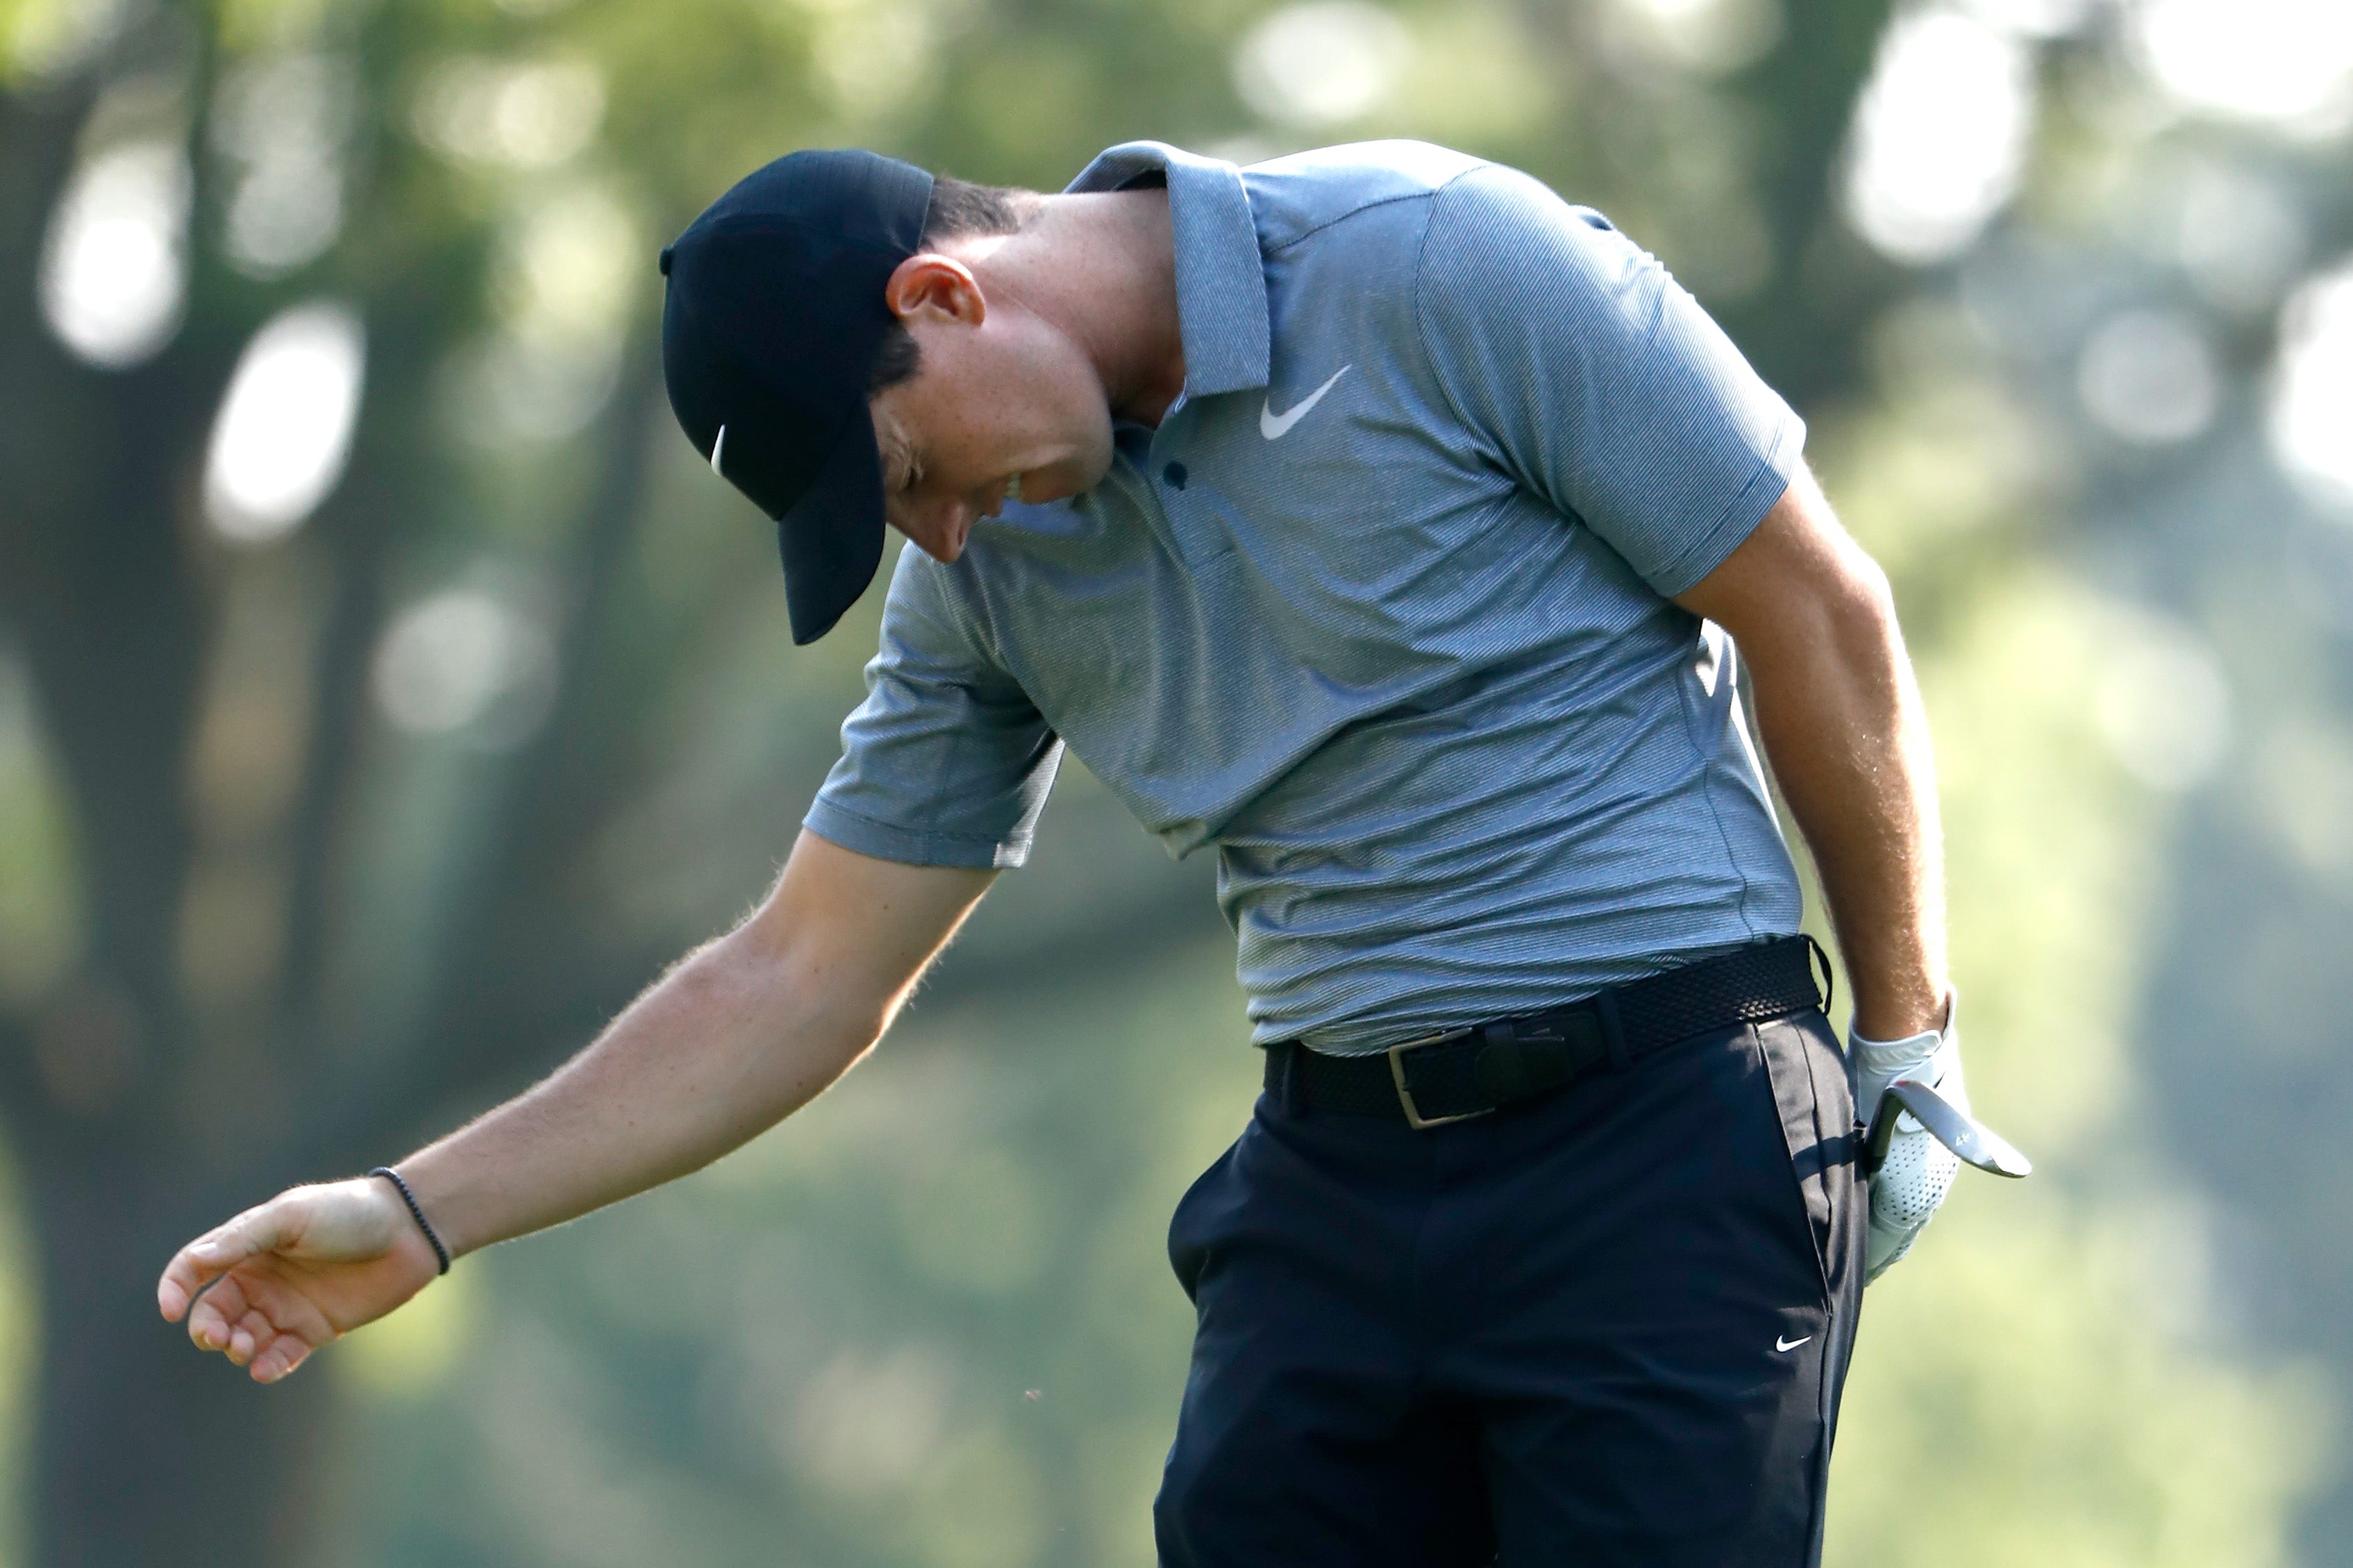 Why McIlroy isn't a lock for the PGA Championship